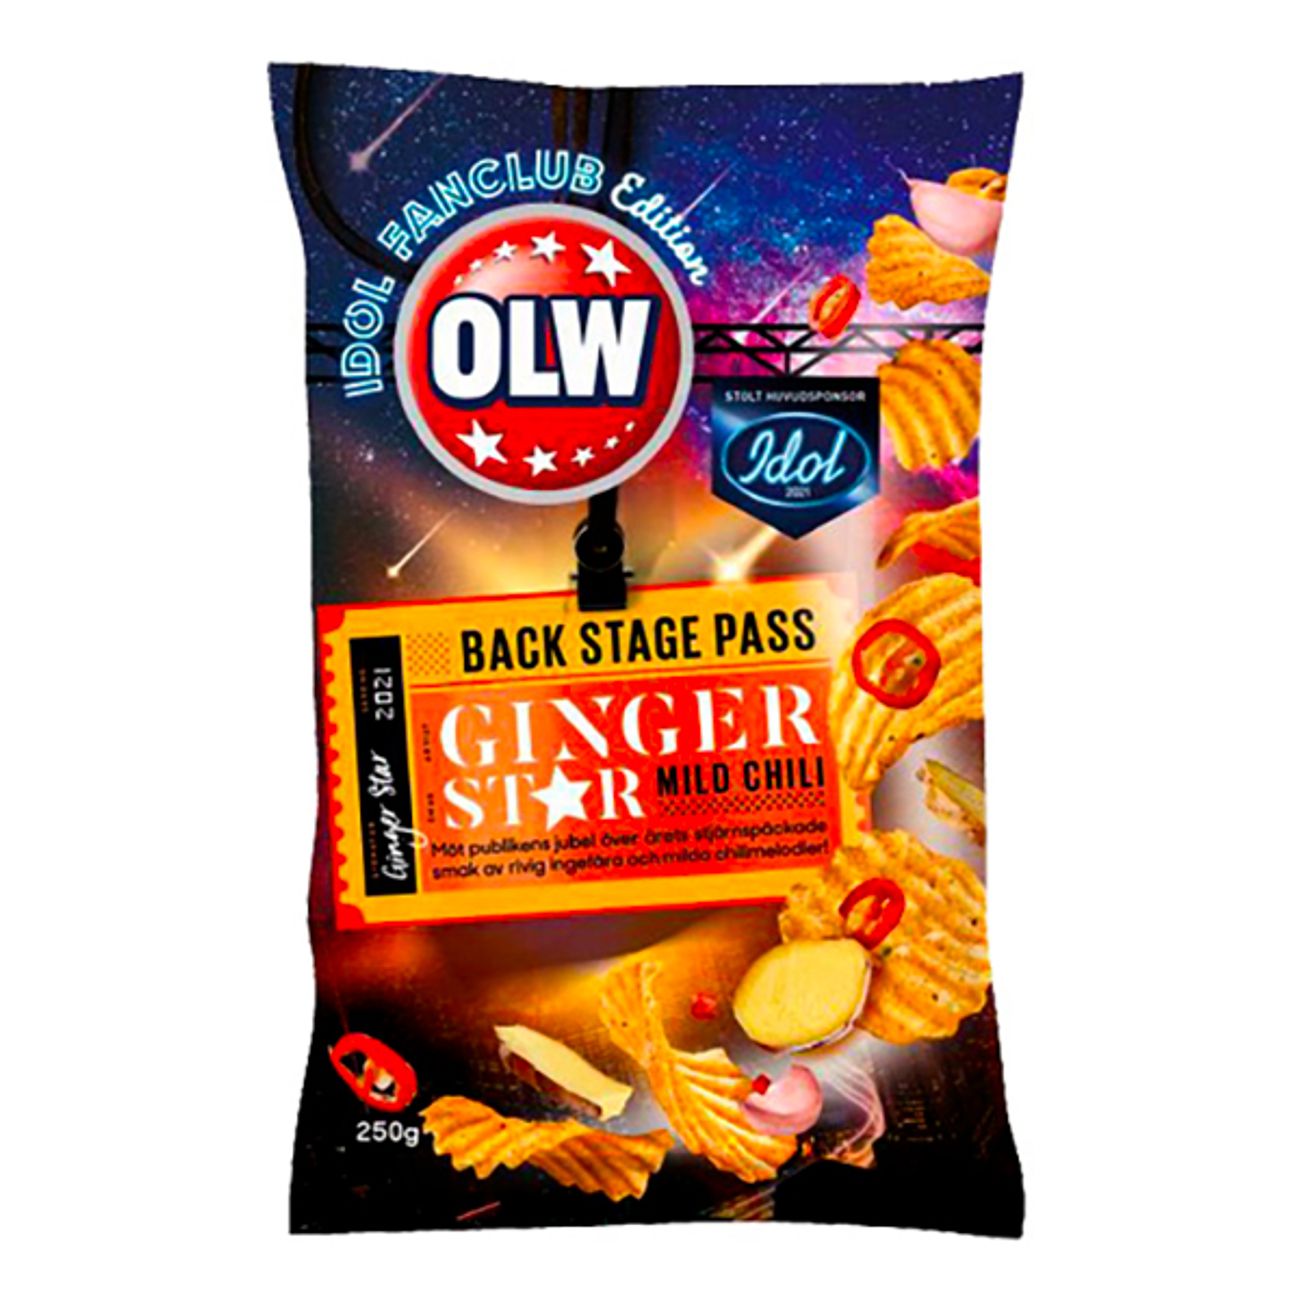 olw-ginger-star-mild-chili-limited-edition-77623-1